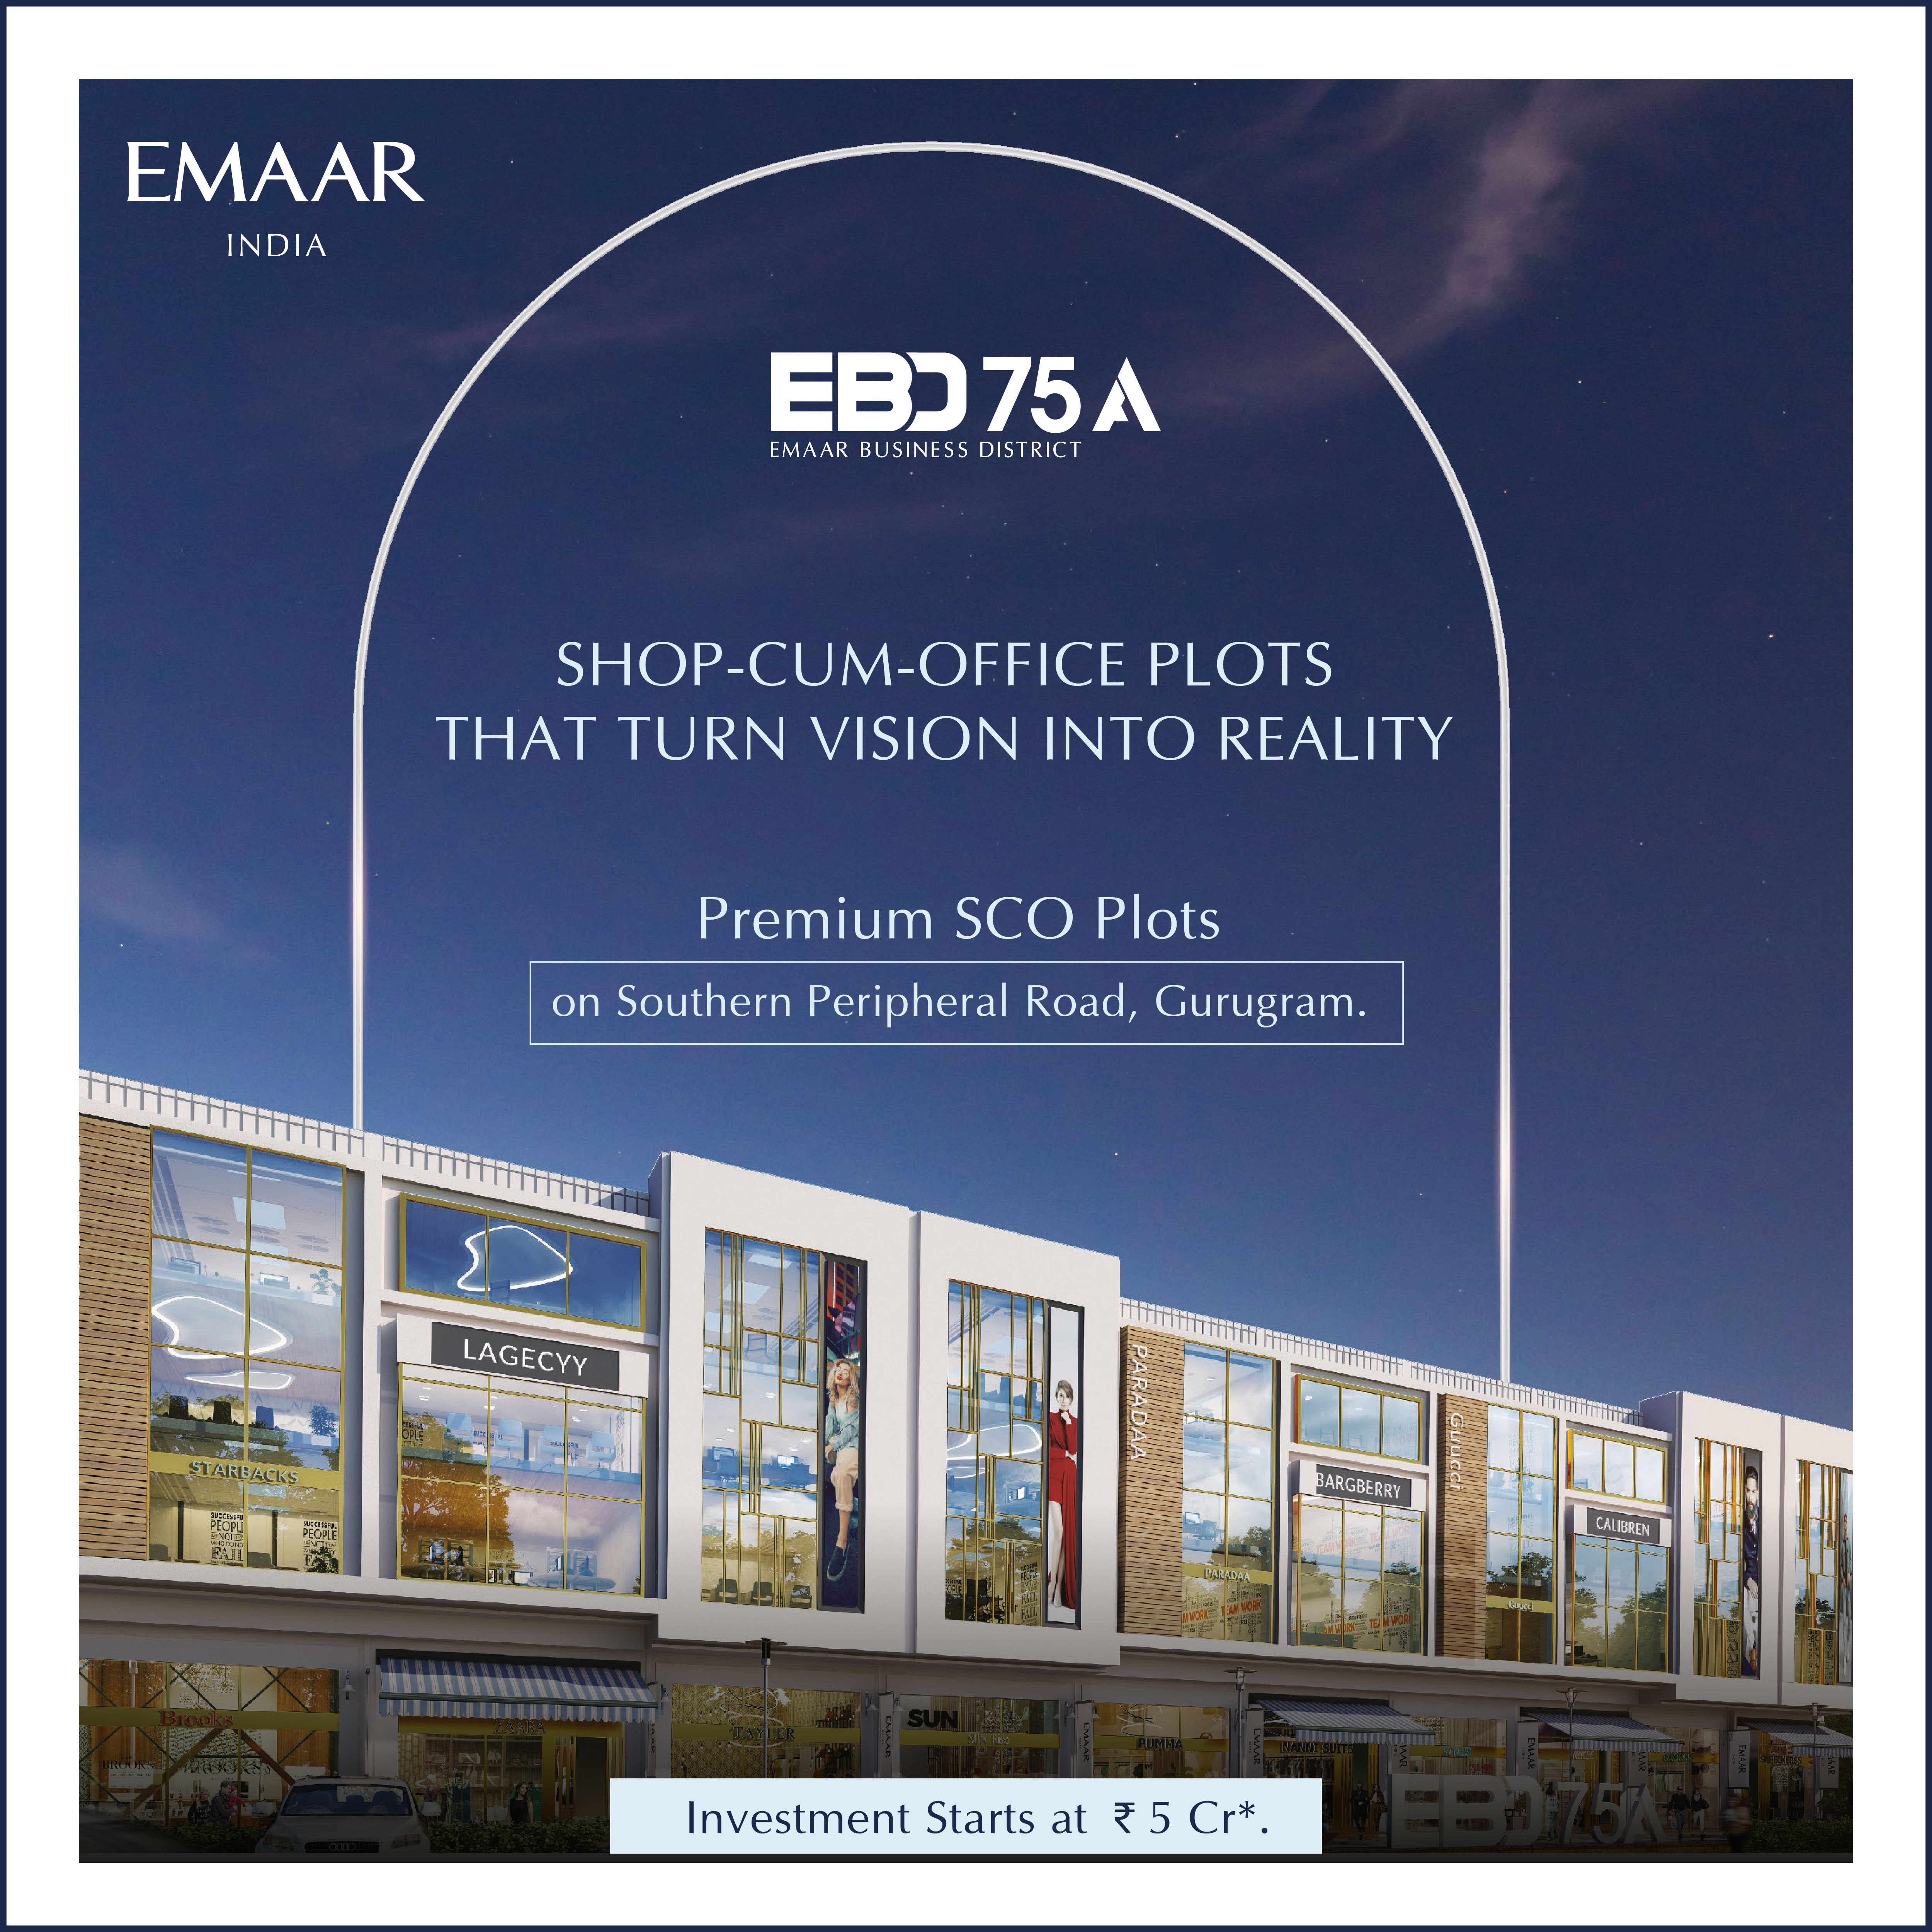 Investment starts Rs 5 Cr at Emaar EBD 75A, Gurgaon